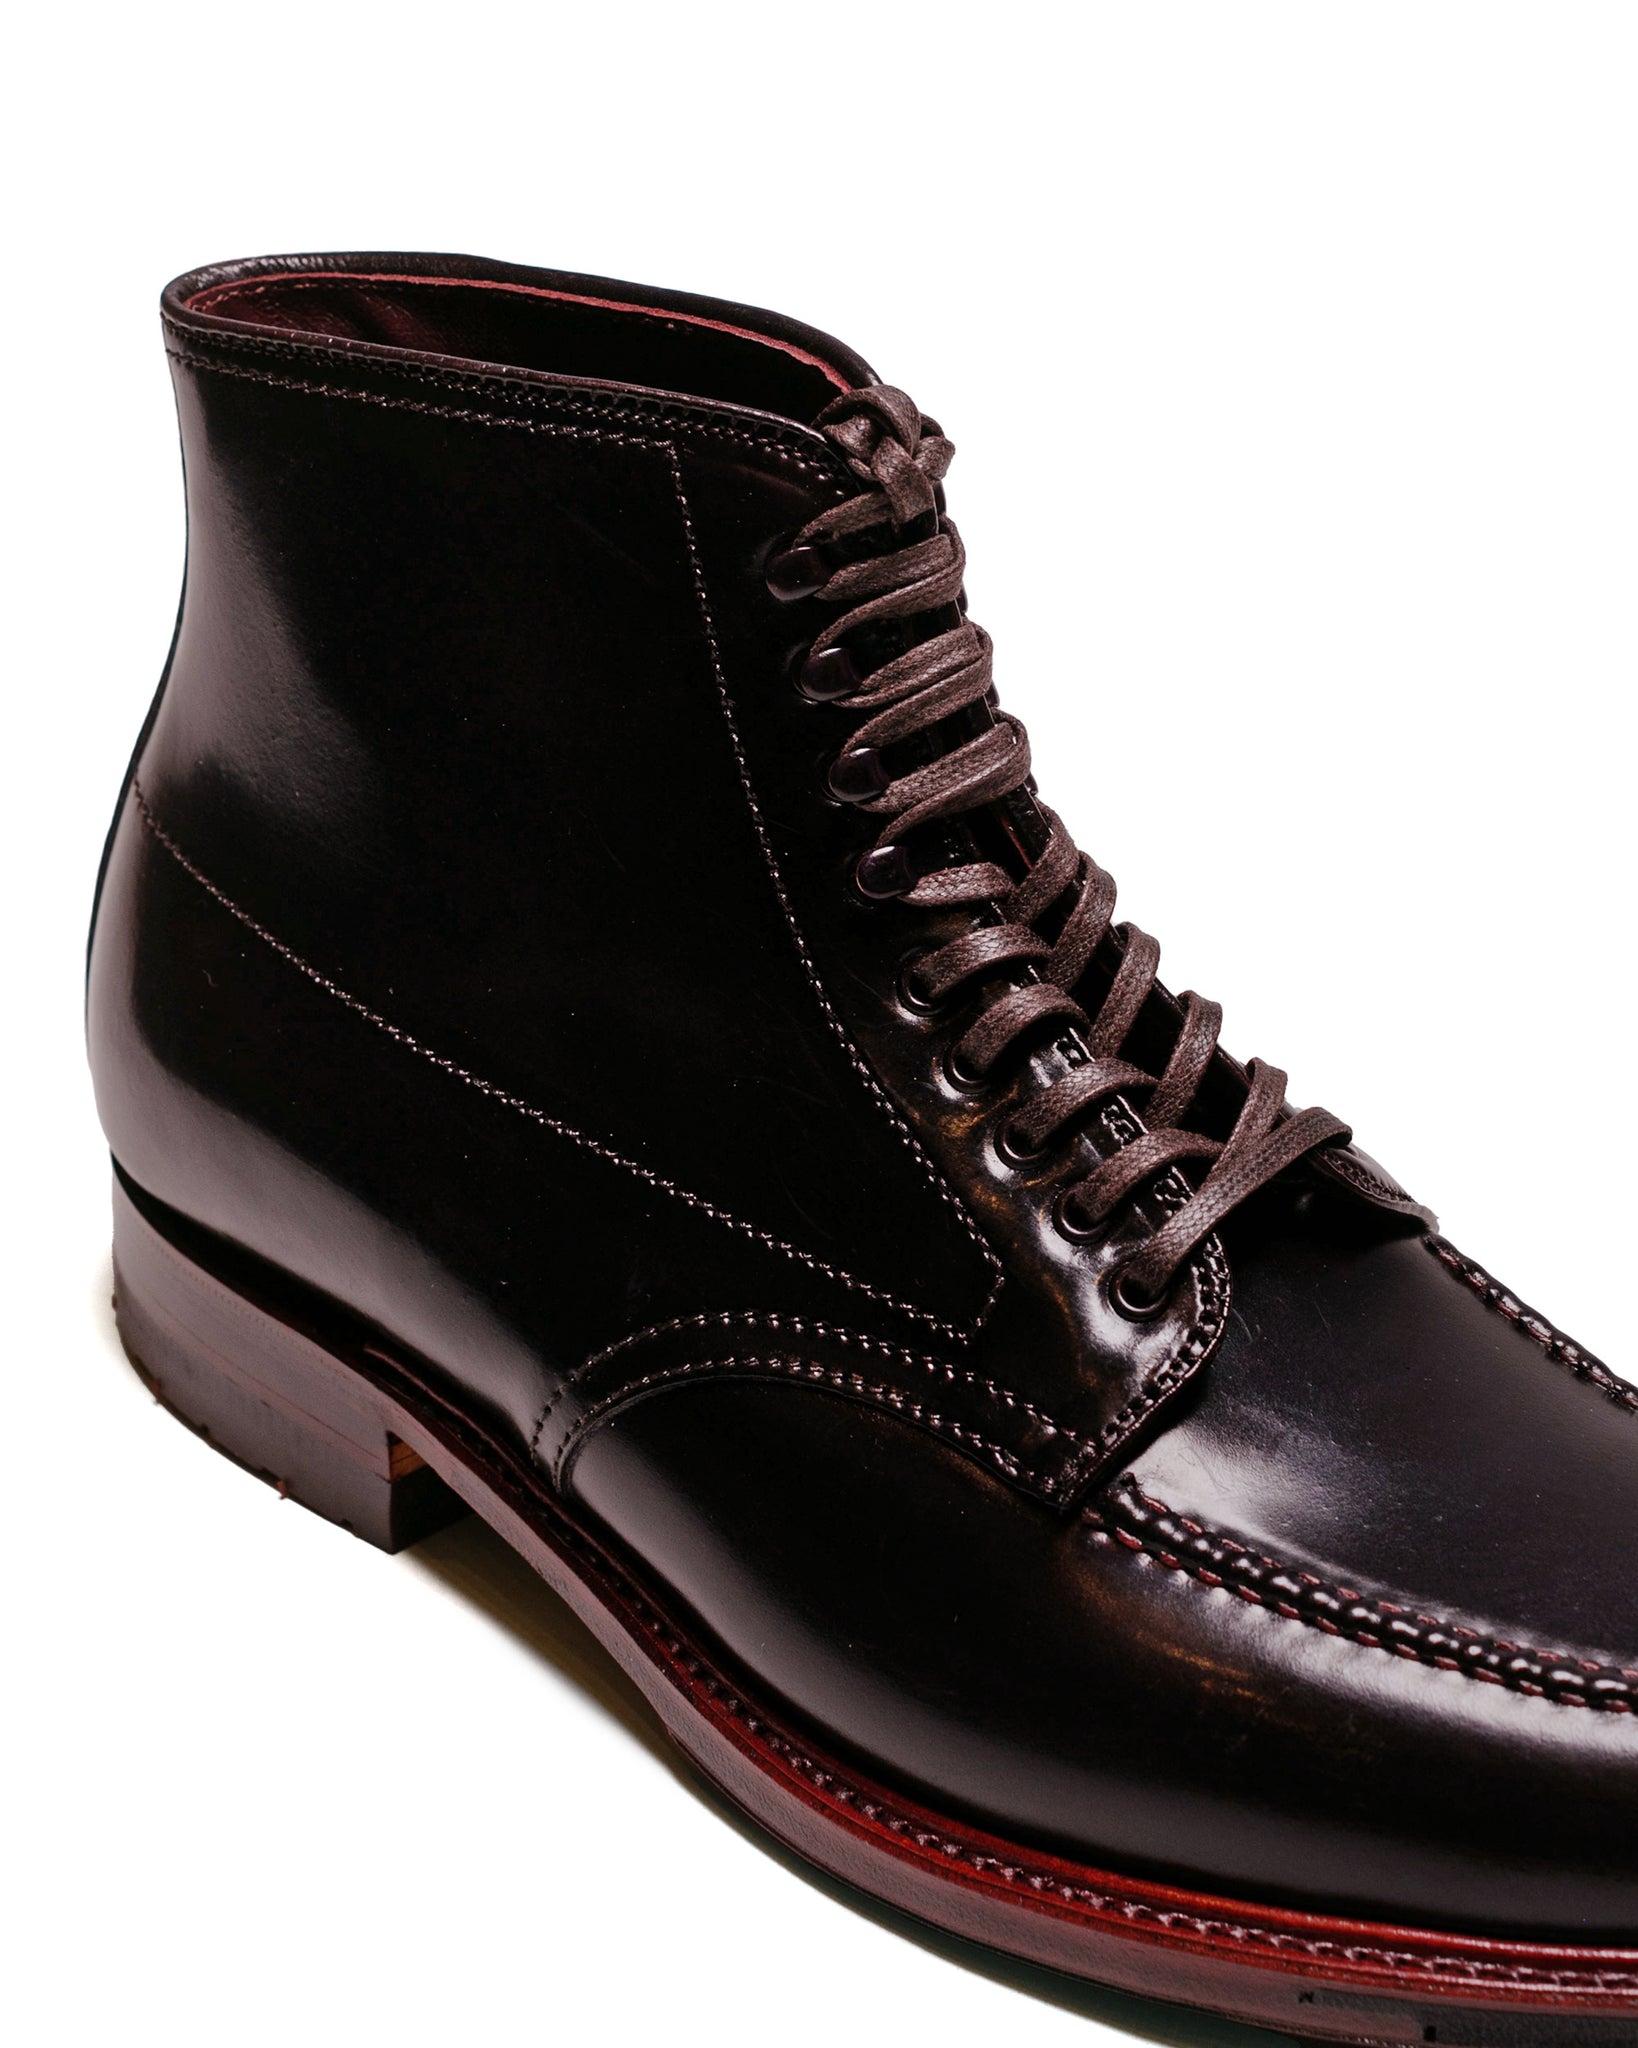 Alden U-Tip Indy Boot with Commando Sole Colour 8 Shell Cordovan G9901HC